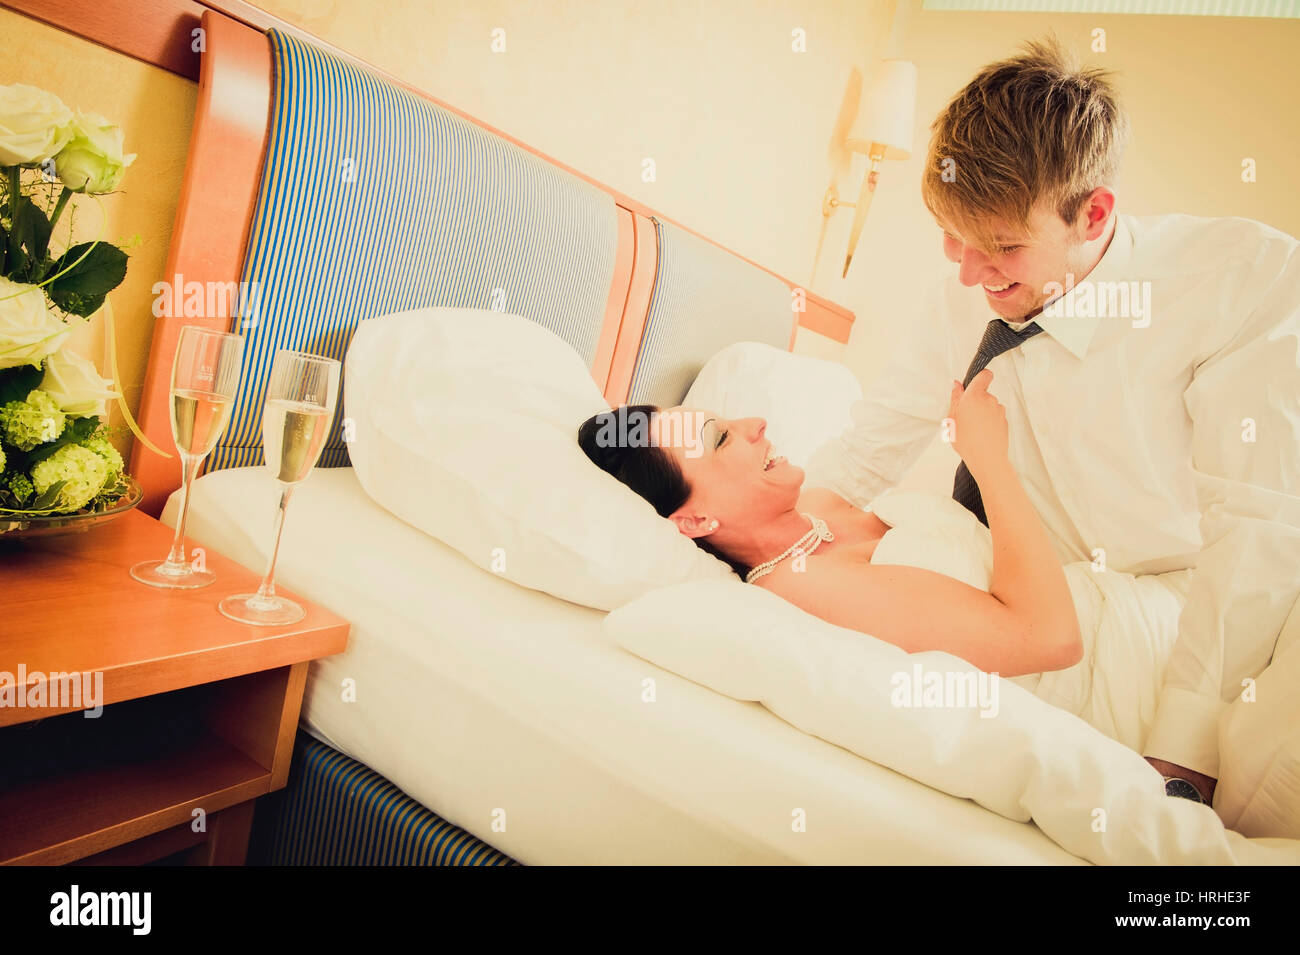 Hotelzimmer im Brautpaar - mariage couple in hotel room Banque D'Images